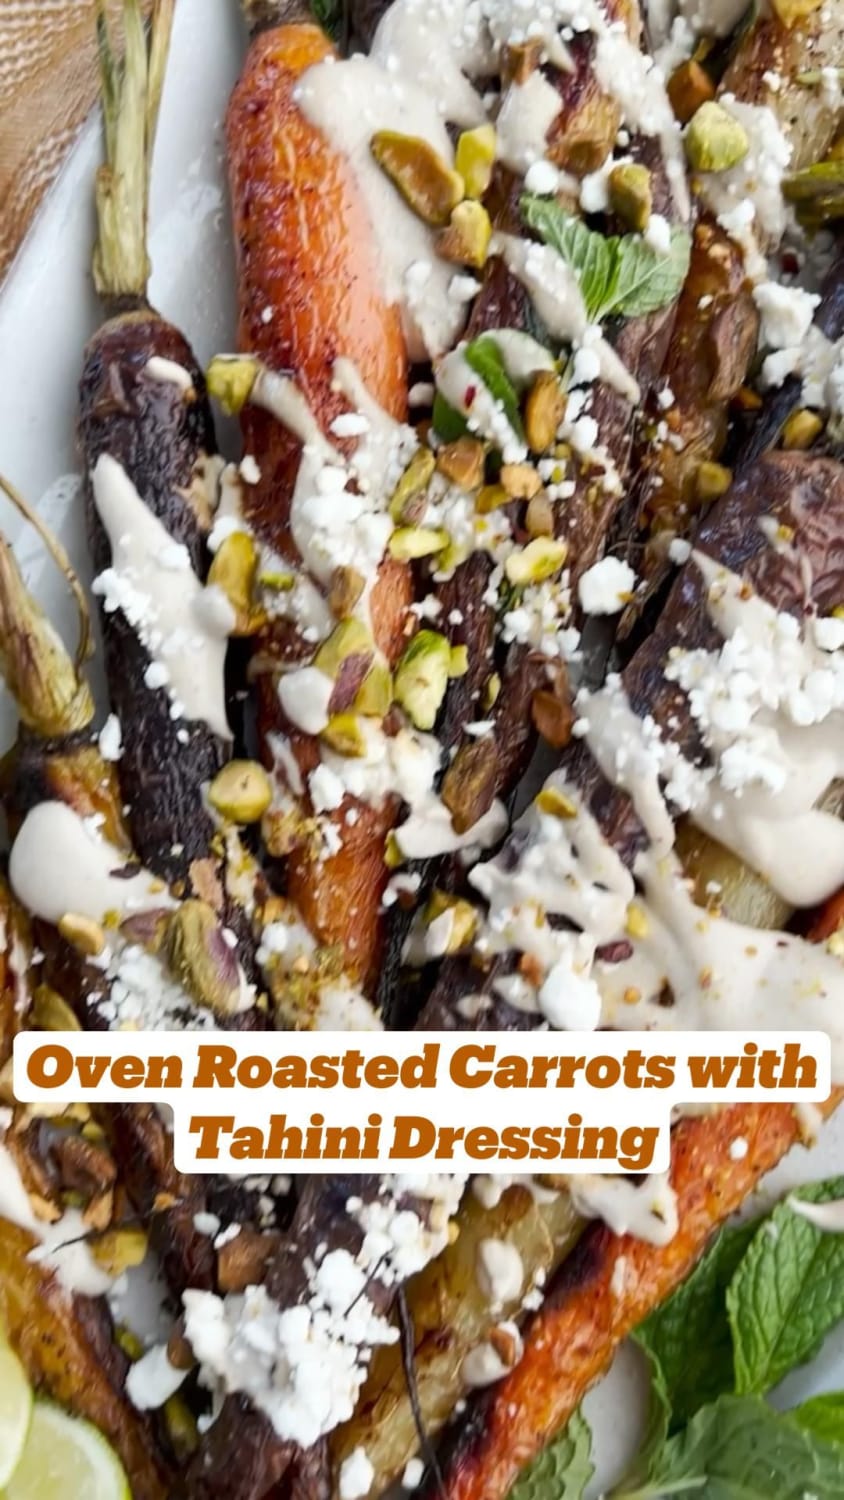 Oven Roasted Carrots with Tahini Dressing